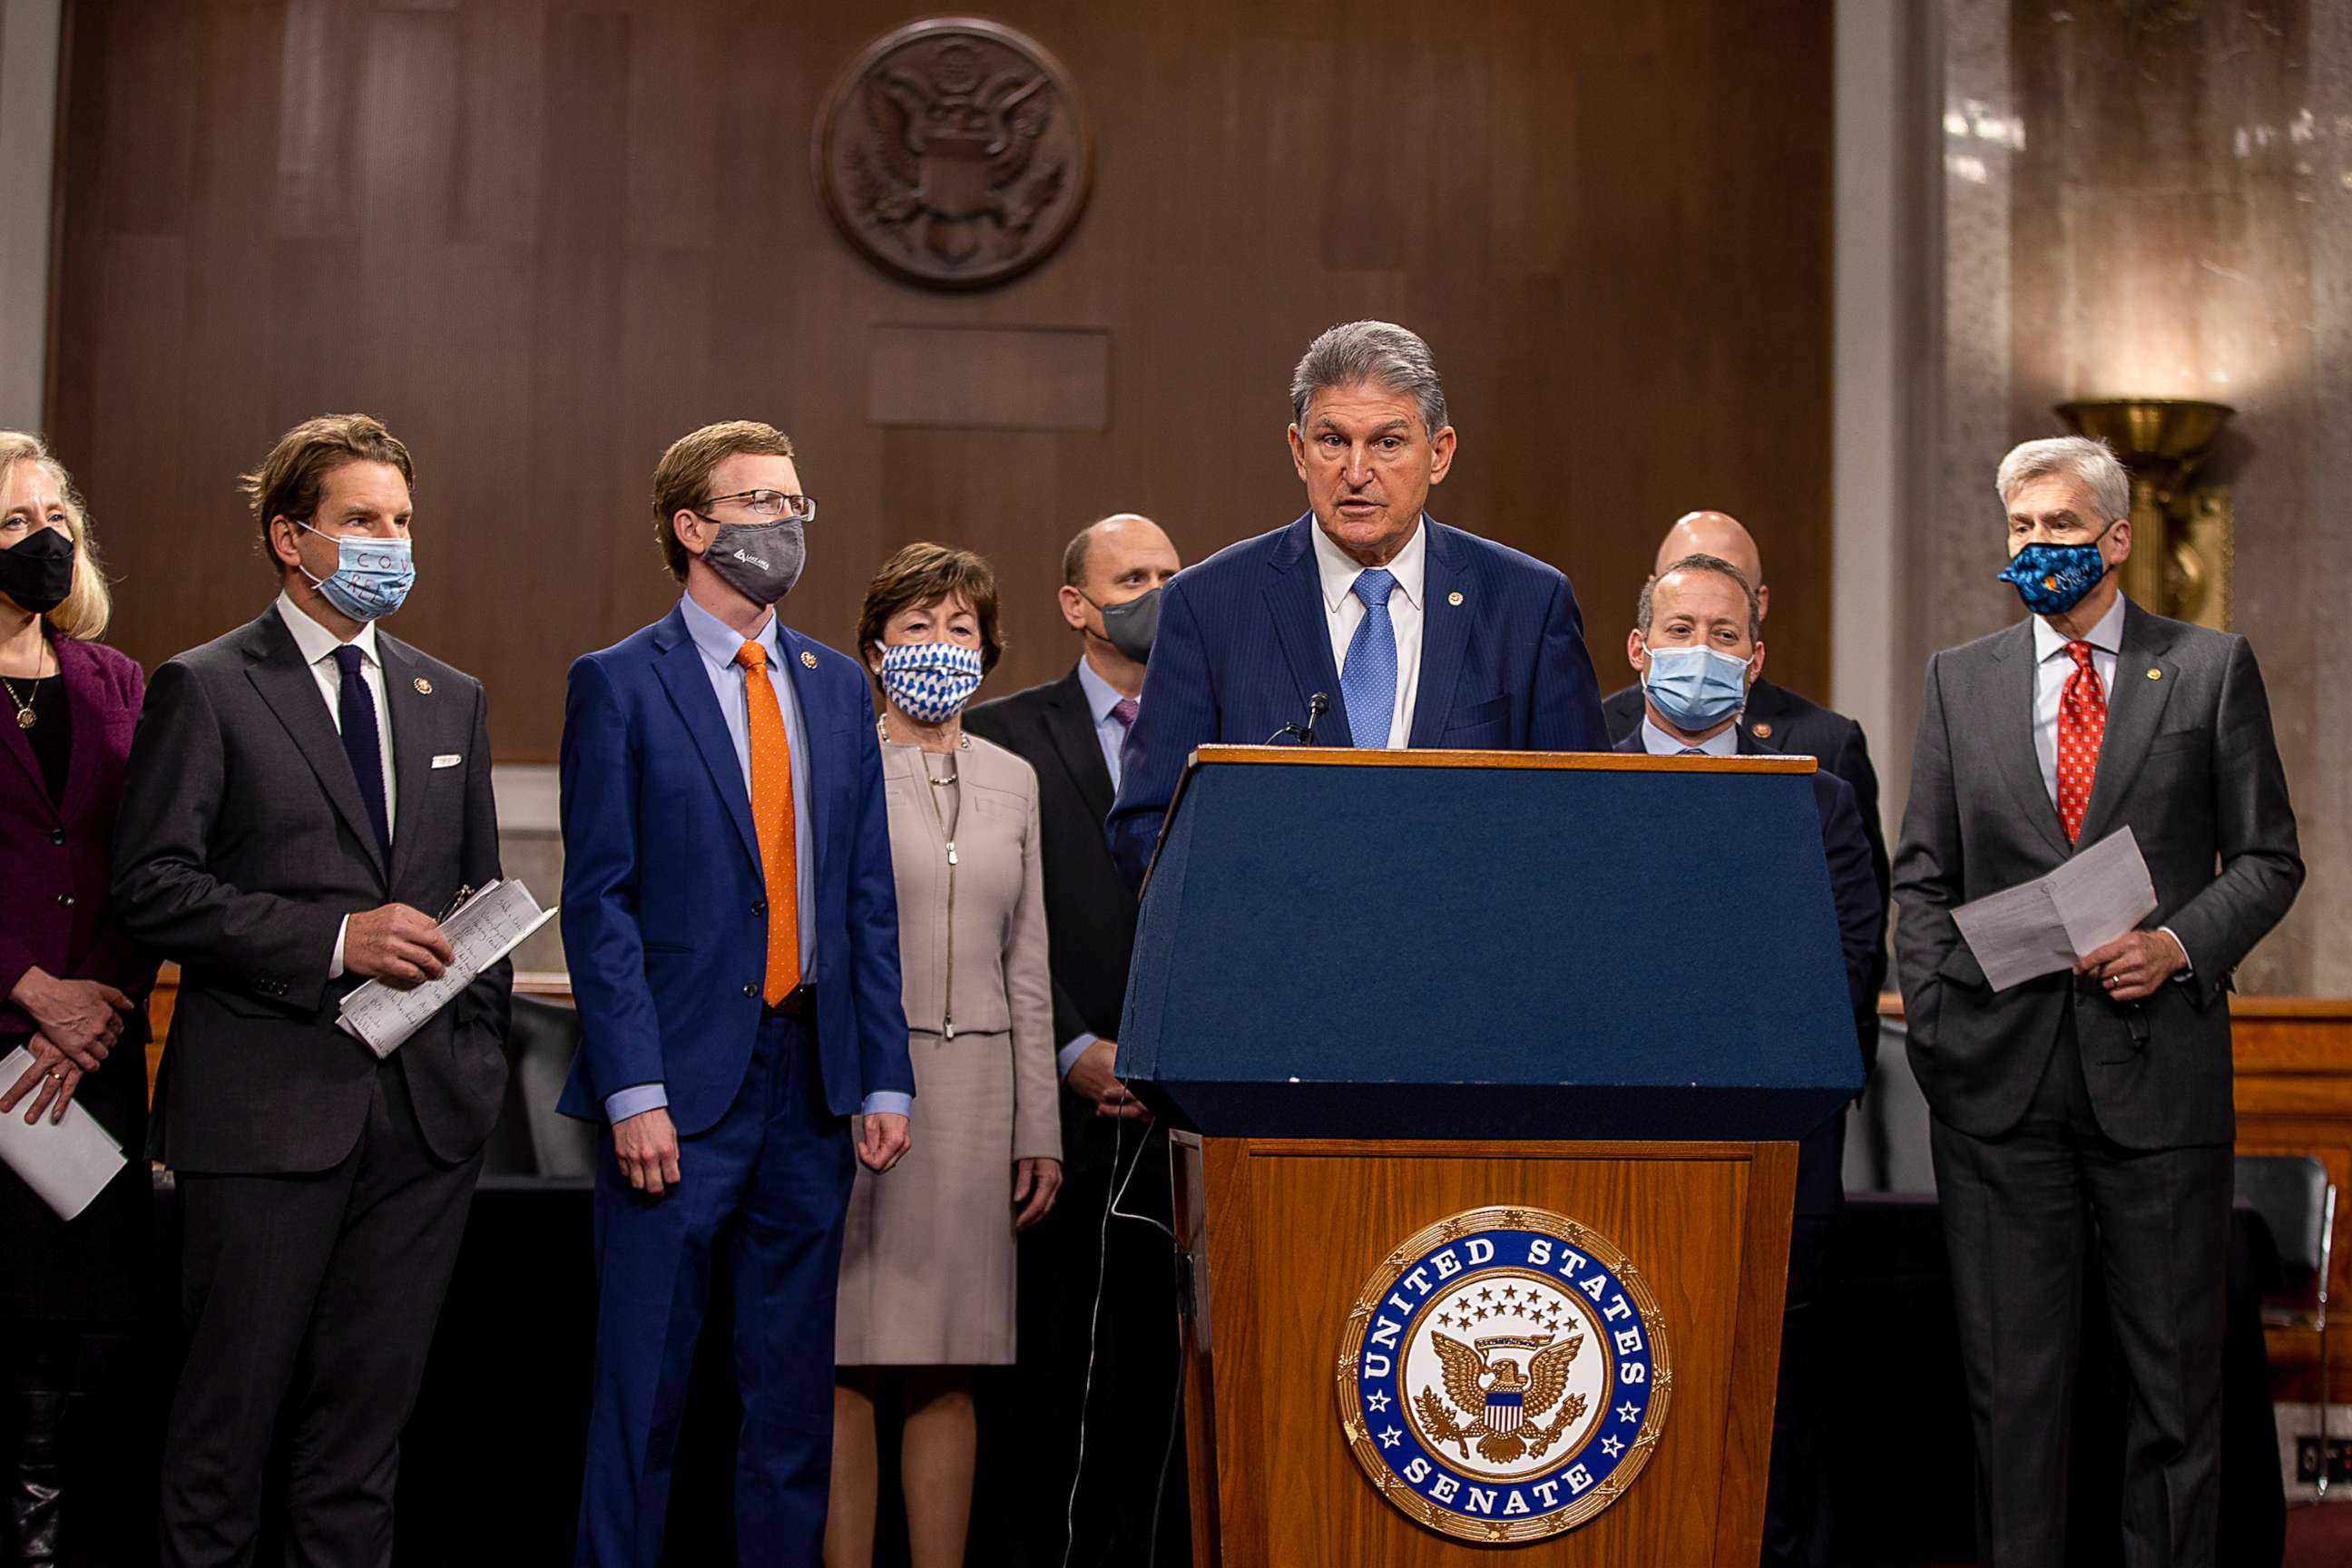 PHOTO: Sen. Joe Manchin (D-WV) speaks alongside a bipartisan group of Democrat and Republican members of Congress as they announce a proposal for a Covid-19 relief bill on Capitol Hill, Dec. 1, 2020.